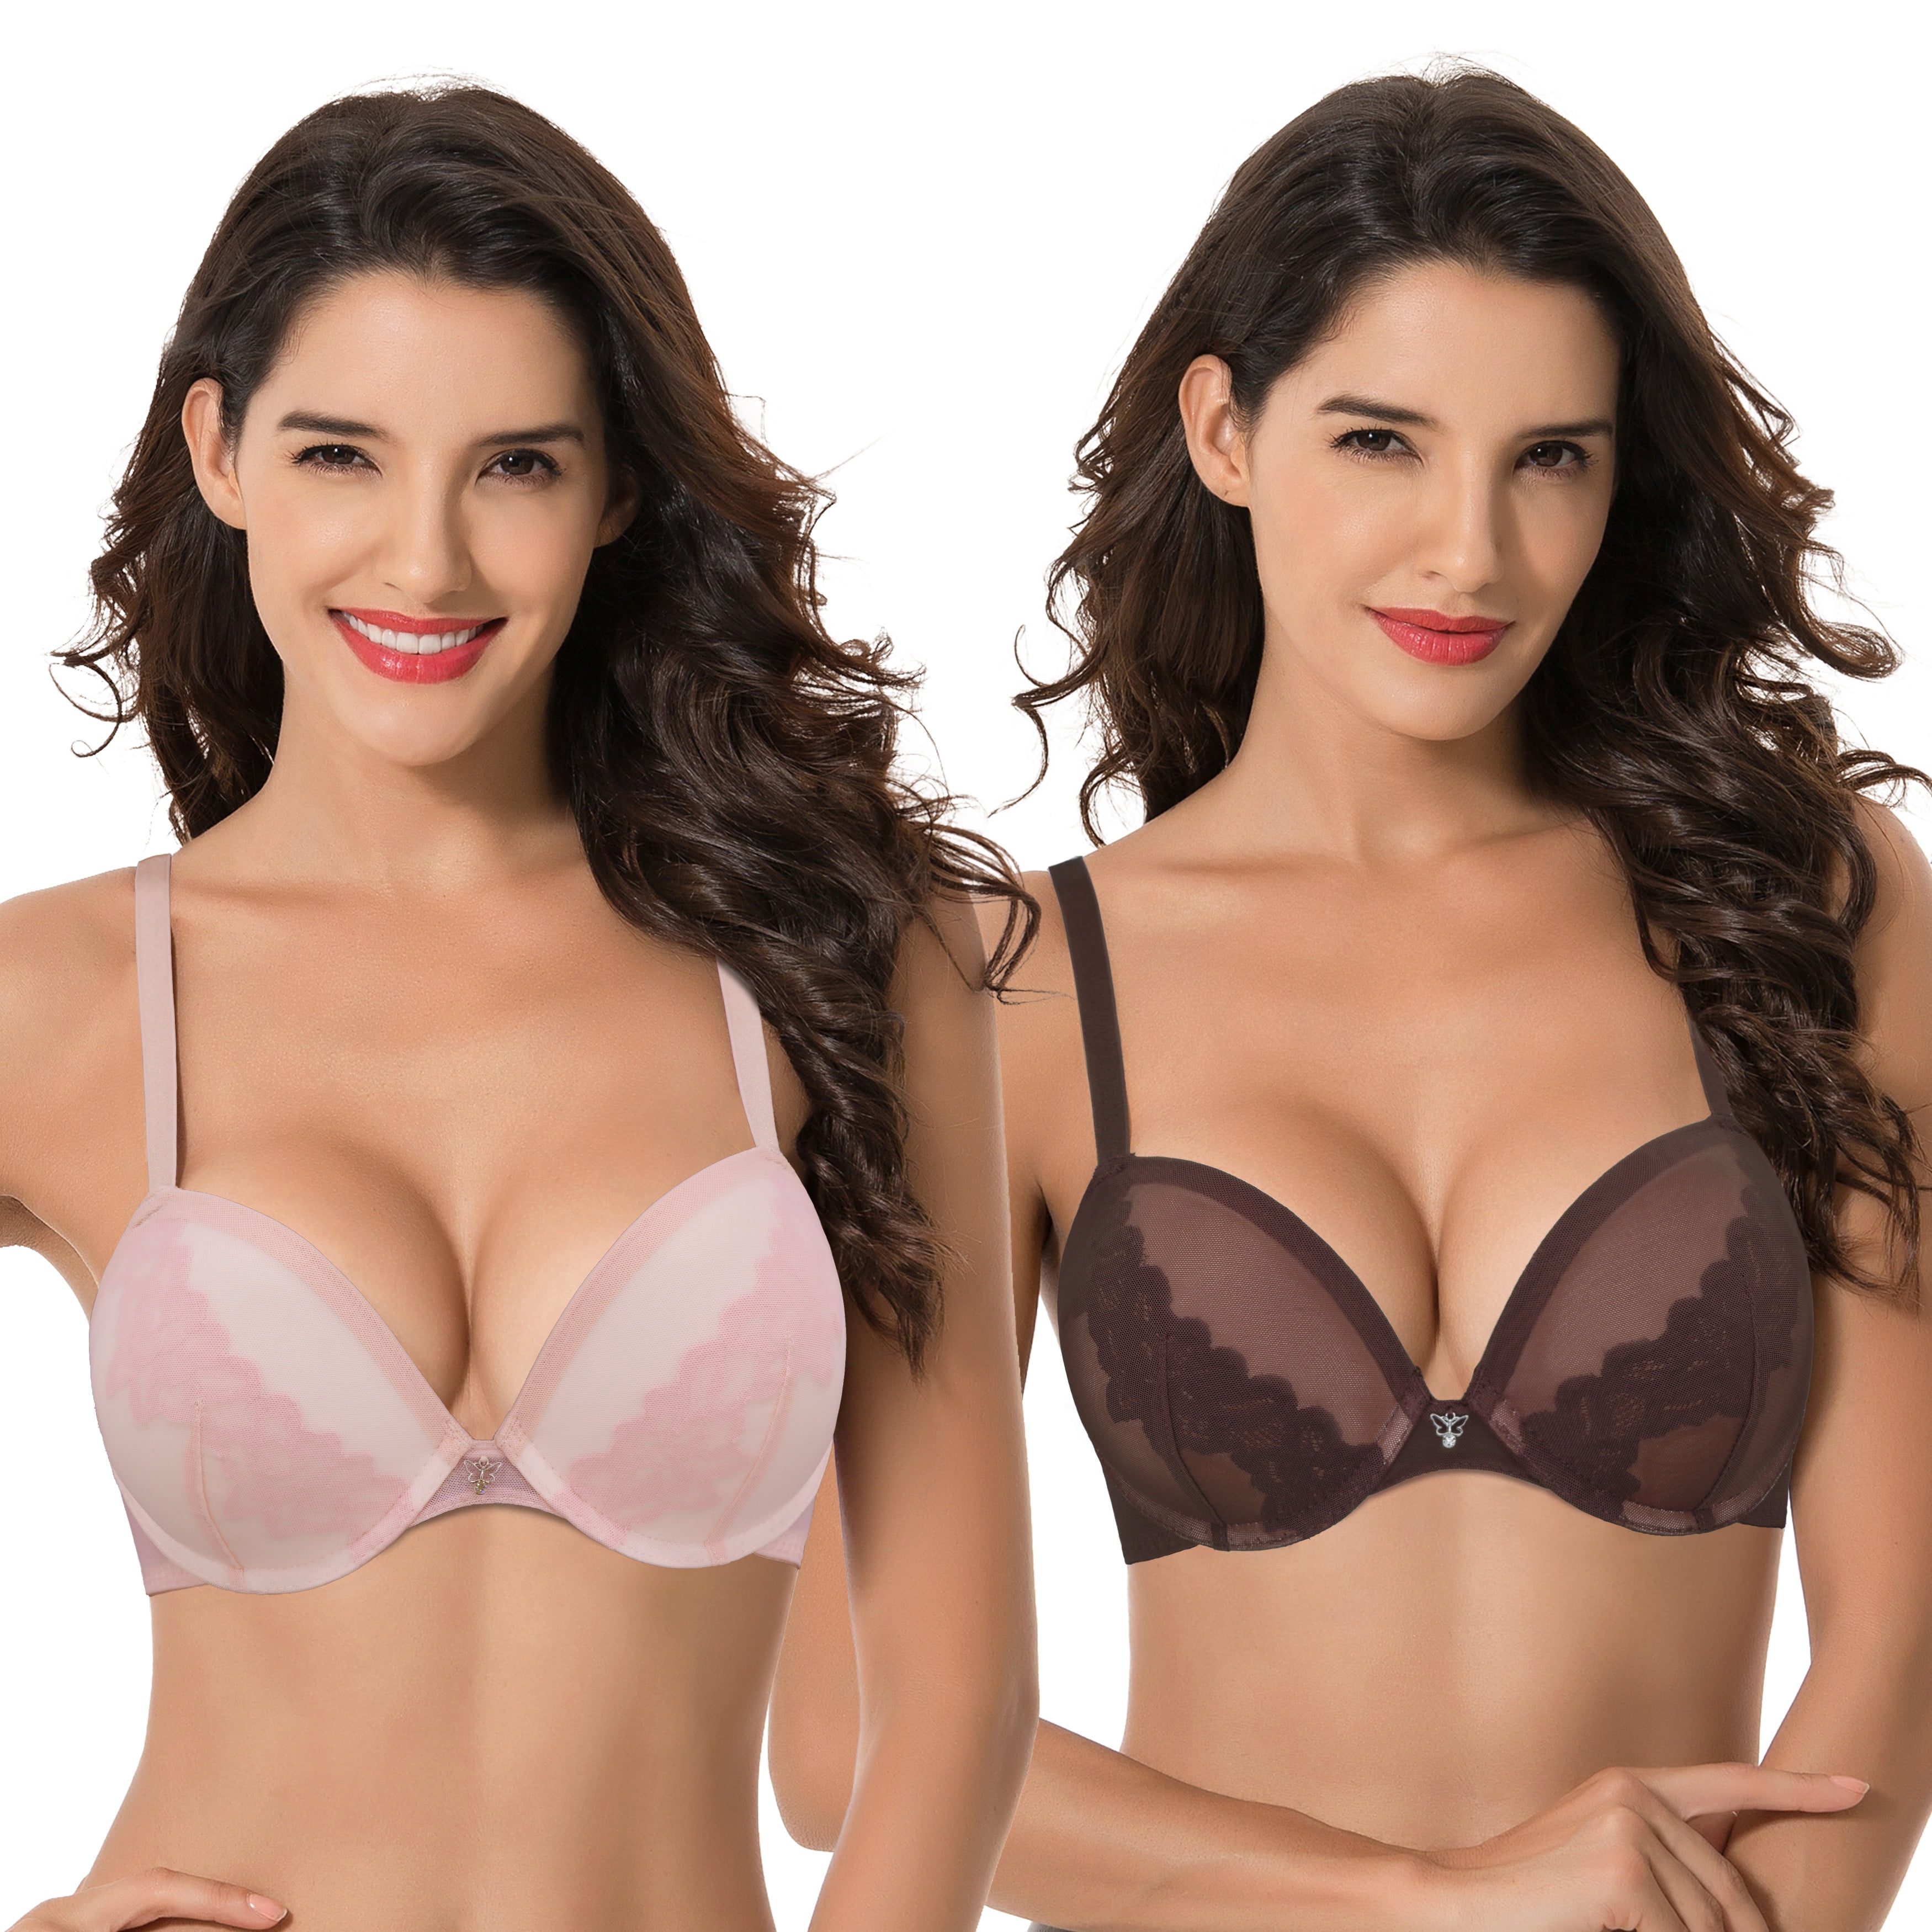 Curve Muse Women's Underwire Plus Size Push Up Add 1 and a Half Cup Lace  Bras-2PK-PINK,Yellow-46DD